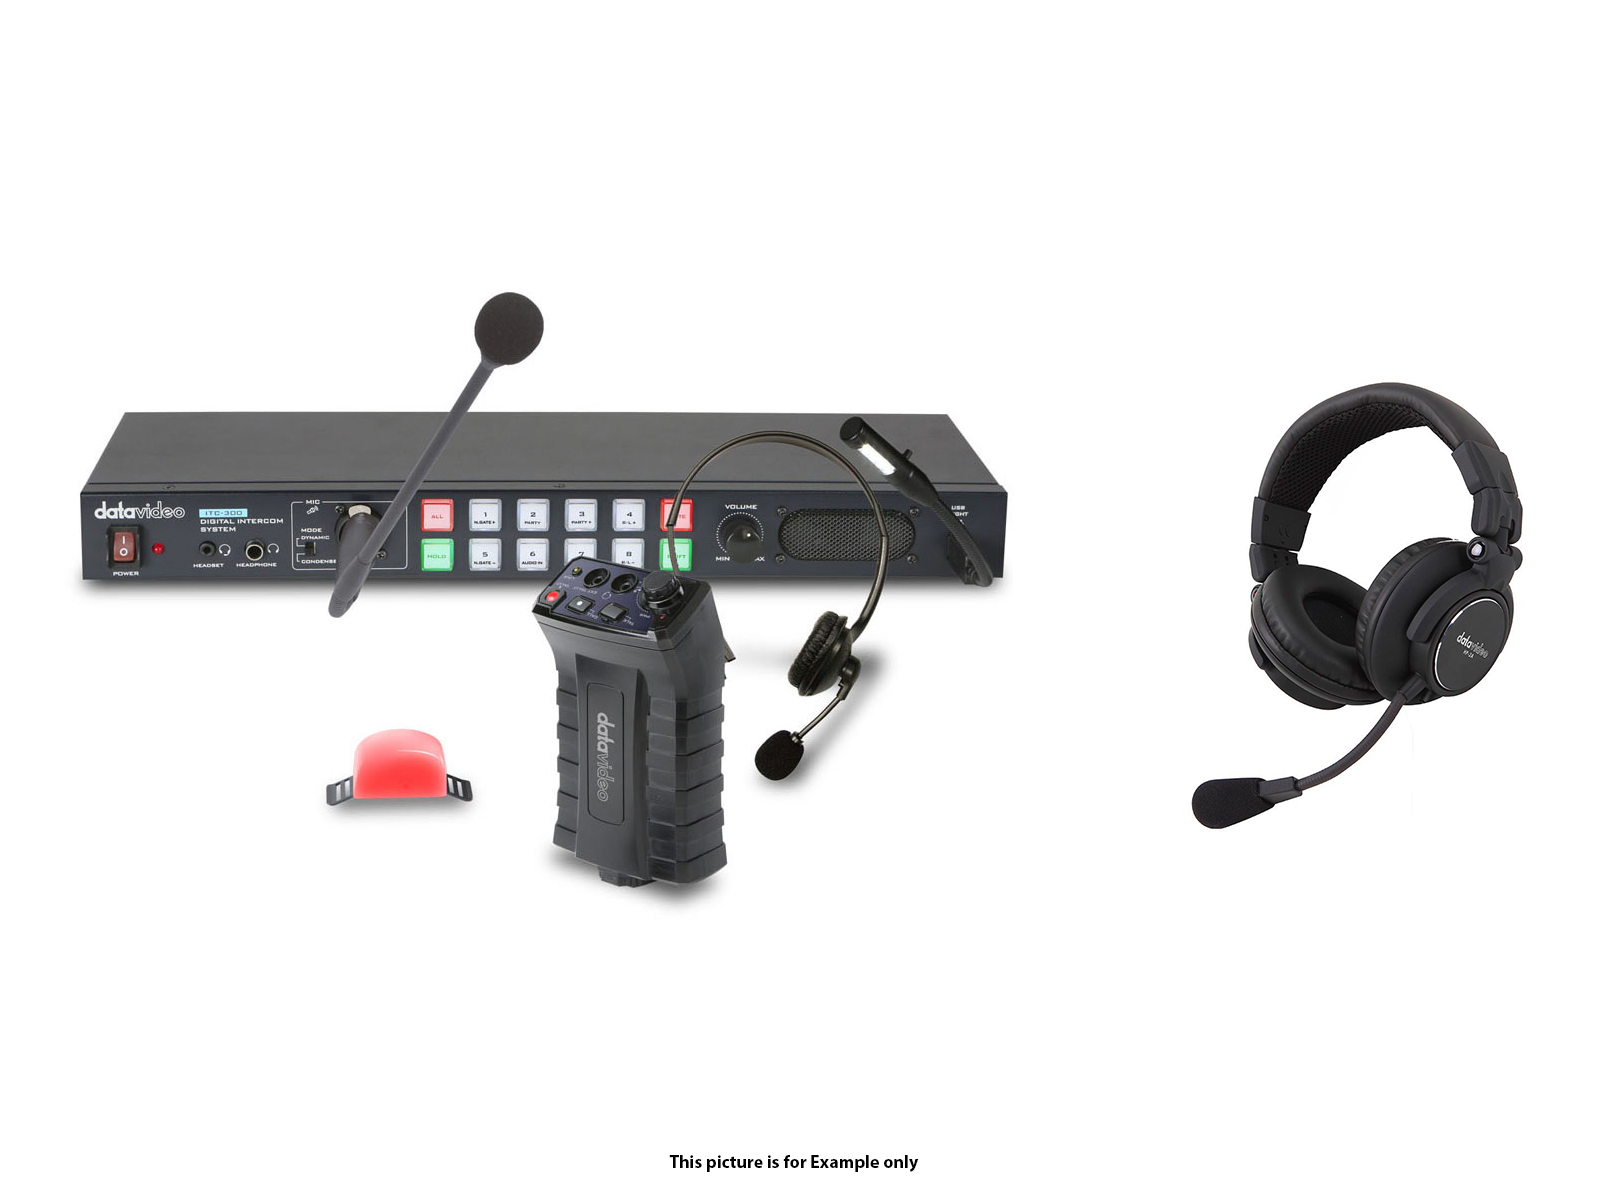 ITC300HP2K Digital intercom system with 4x HP2A headsets by Datavideo